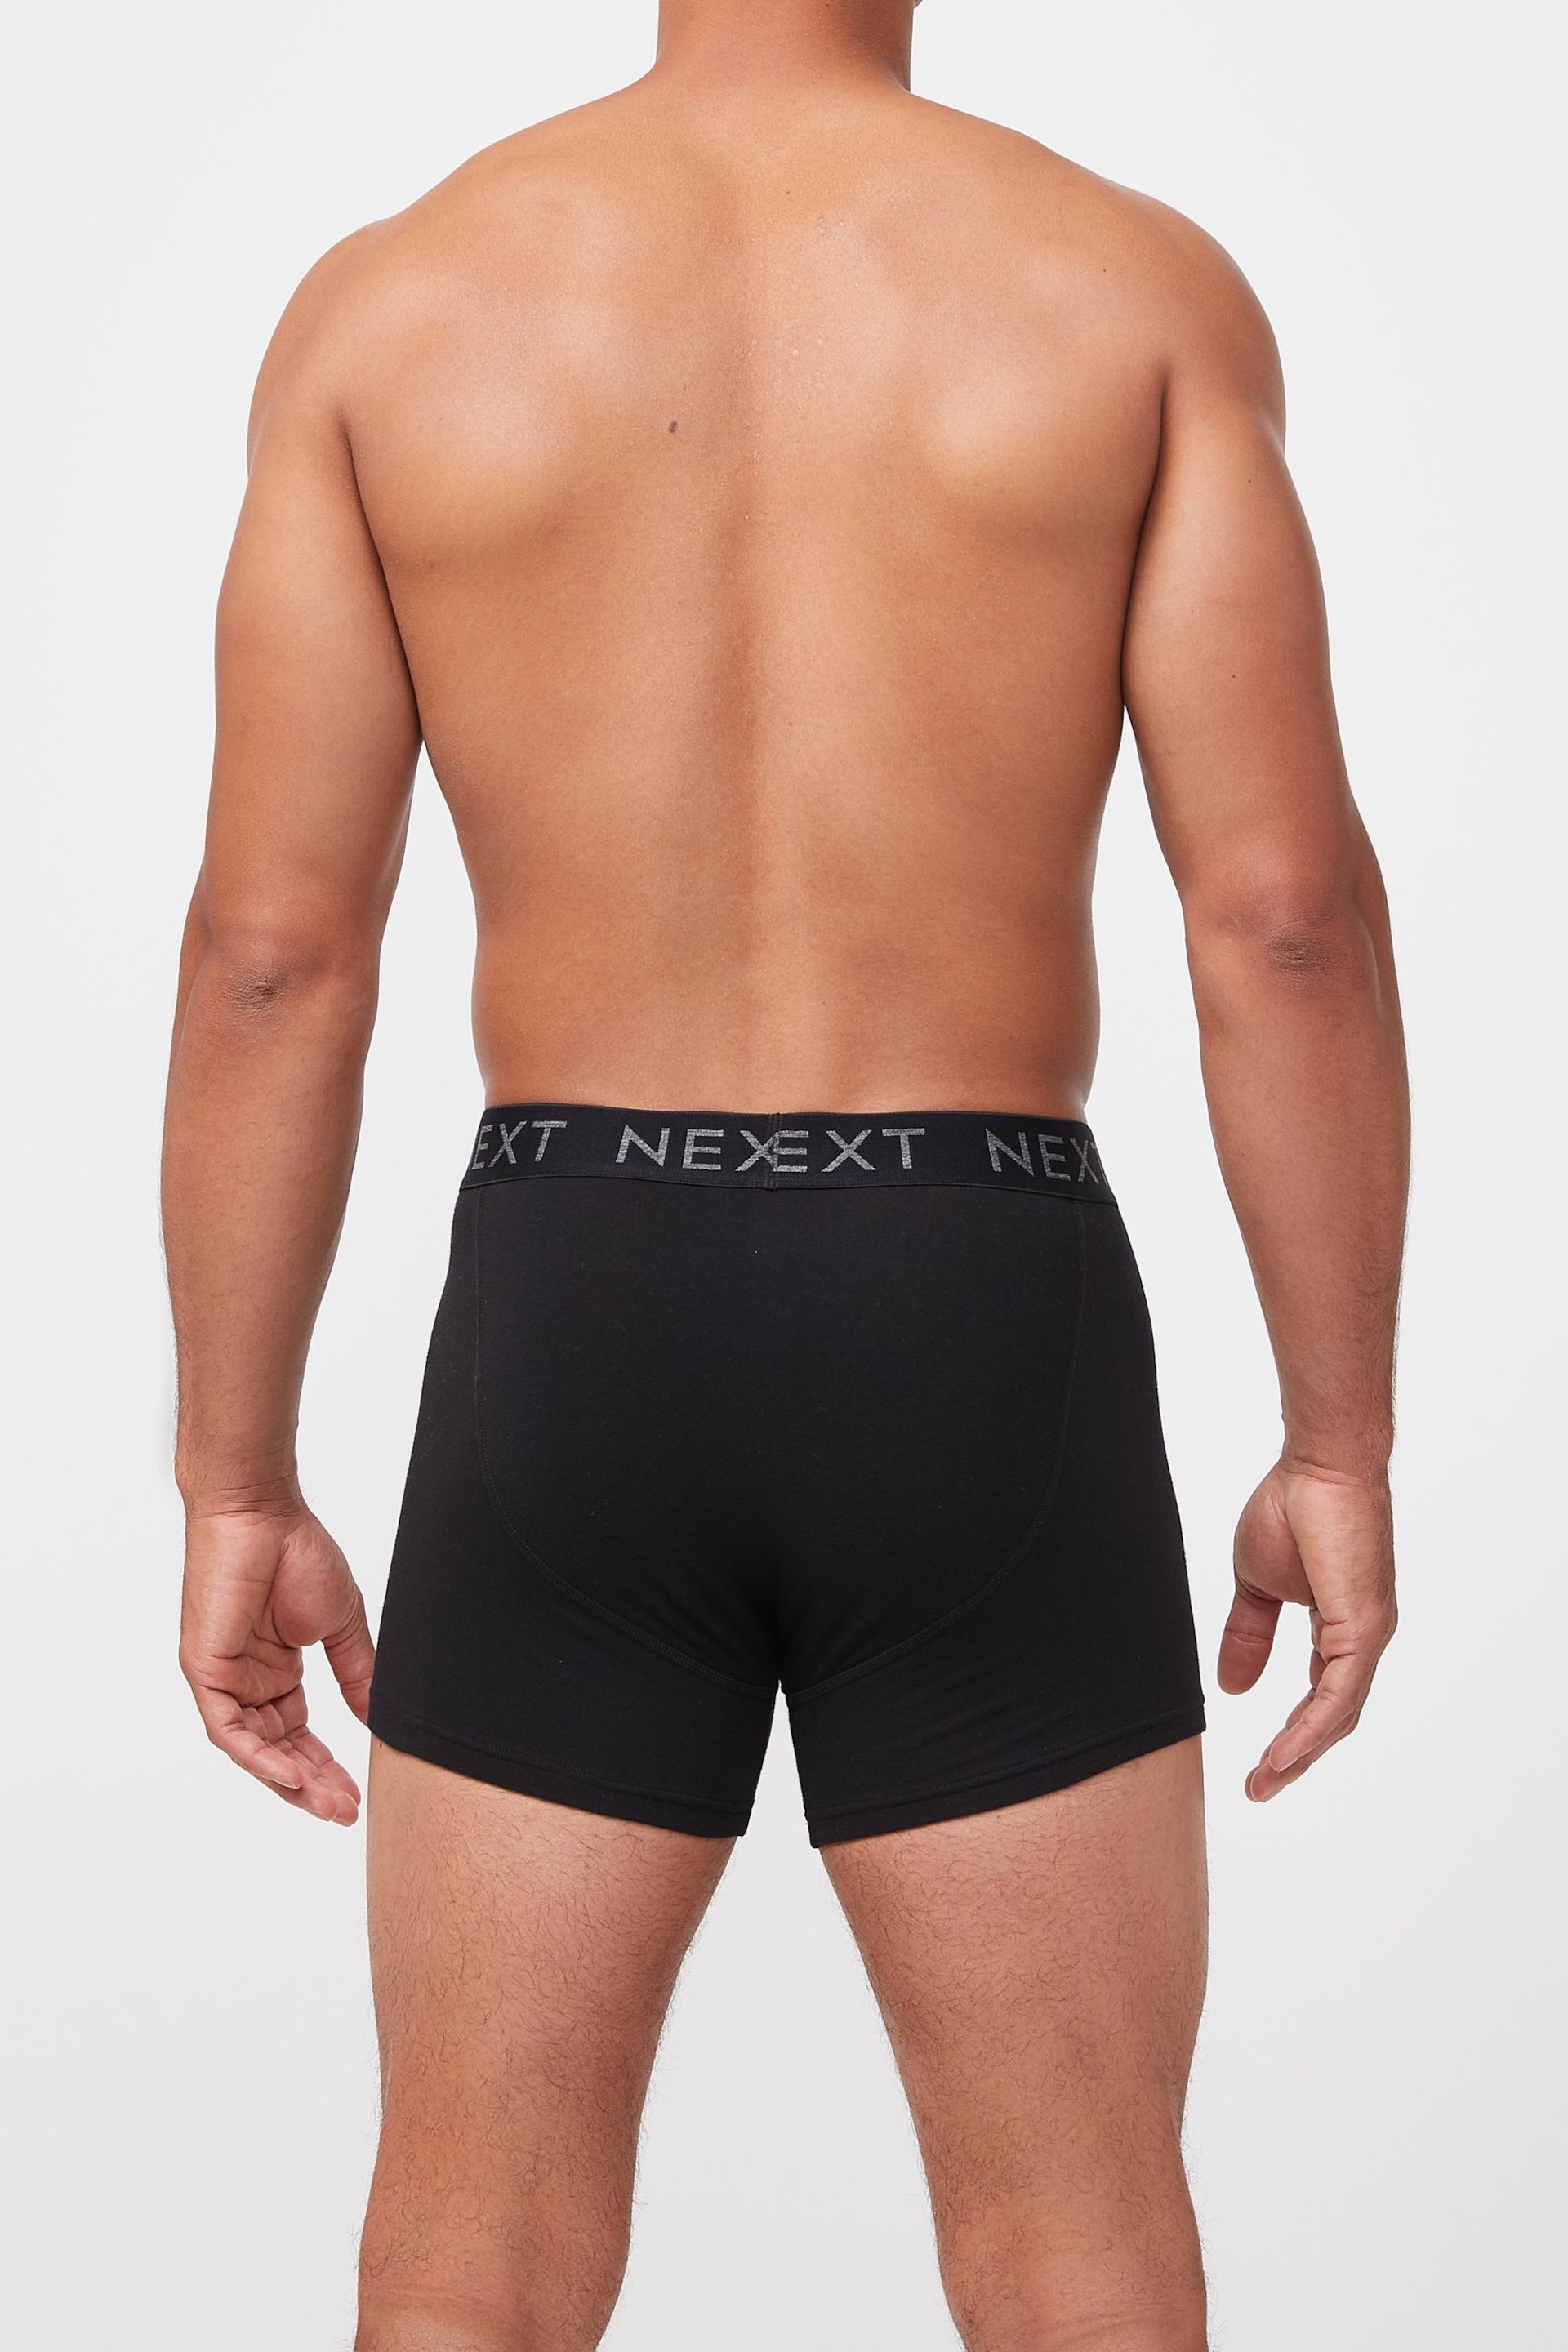 Black 4 pack A-Front Boxers - Image 5 of 6